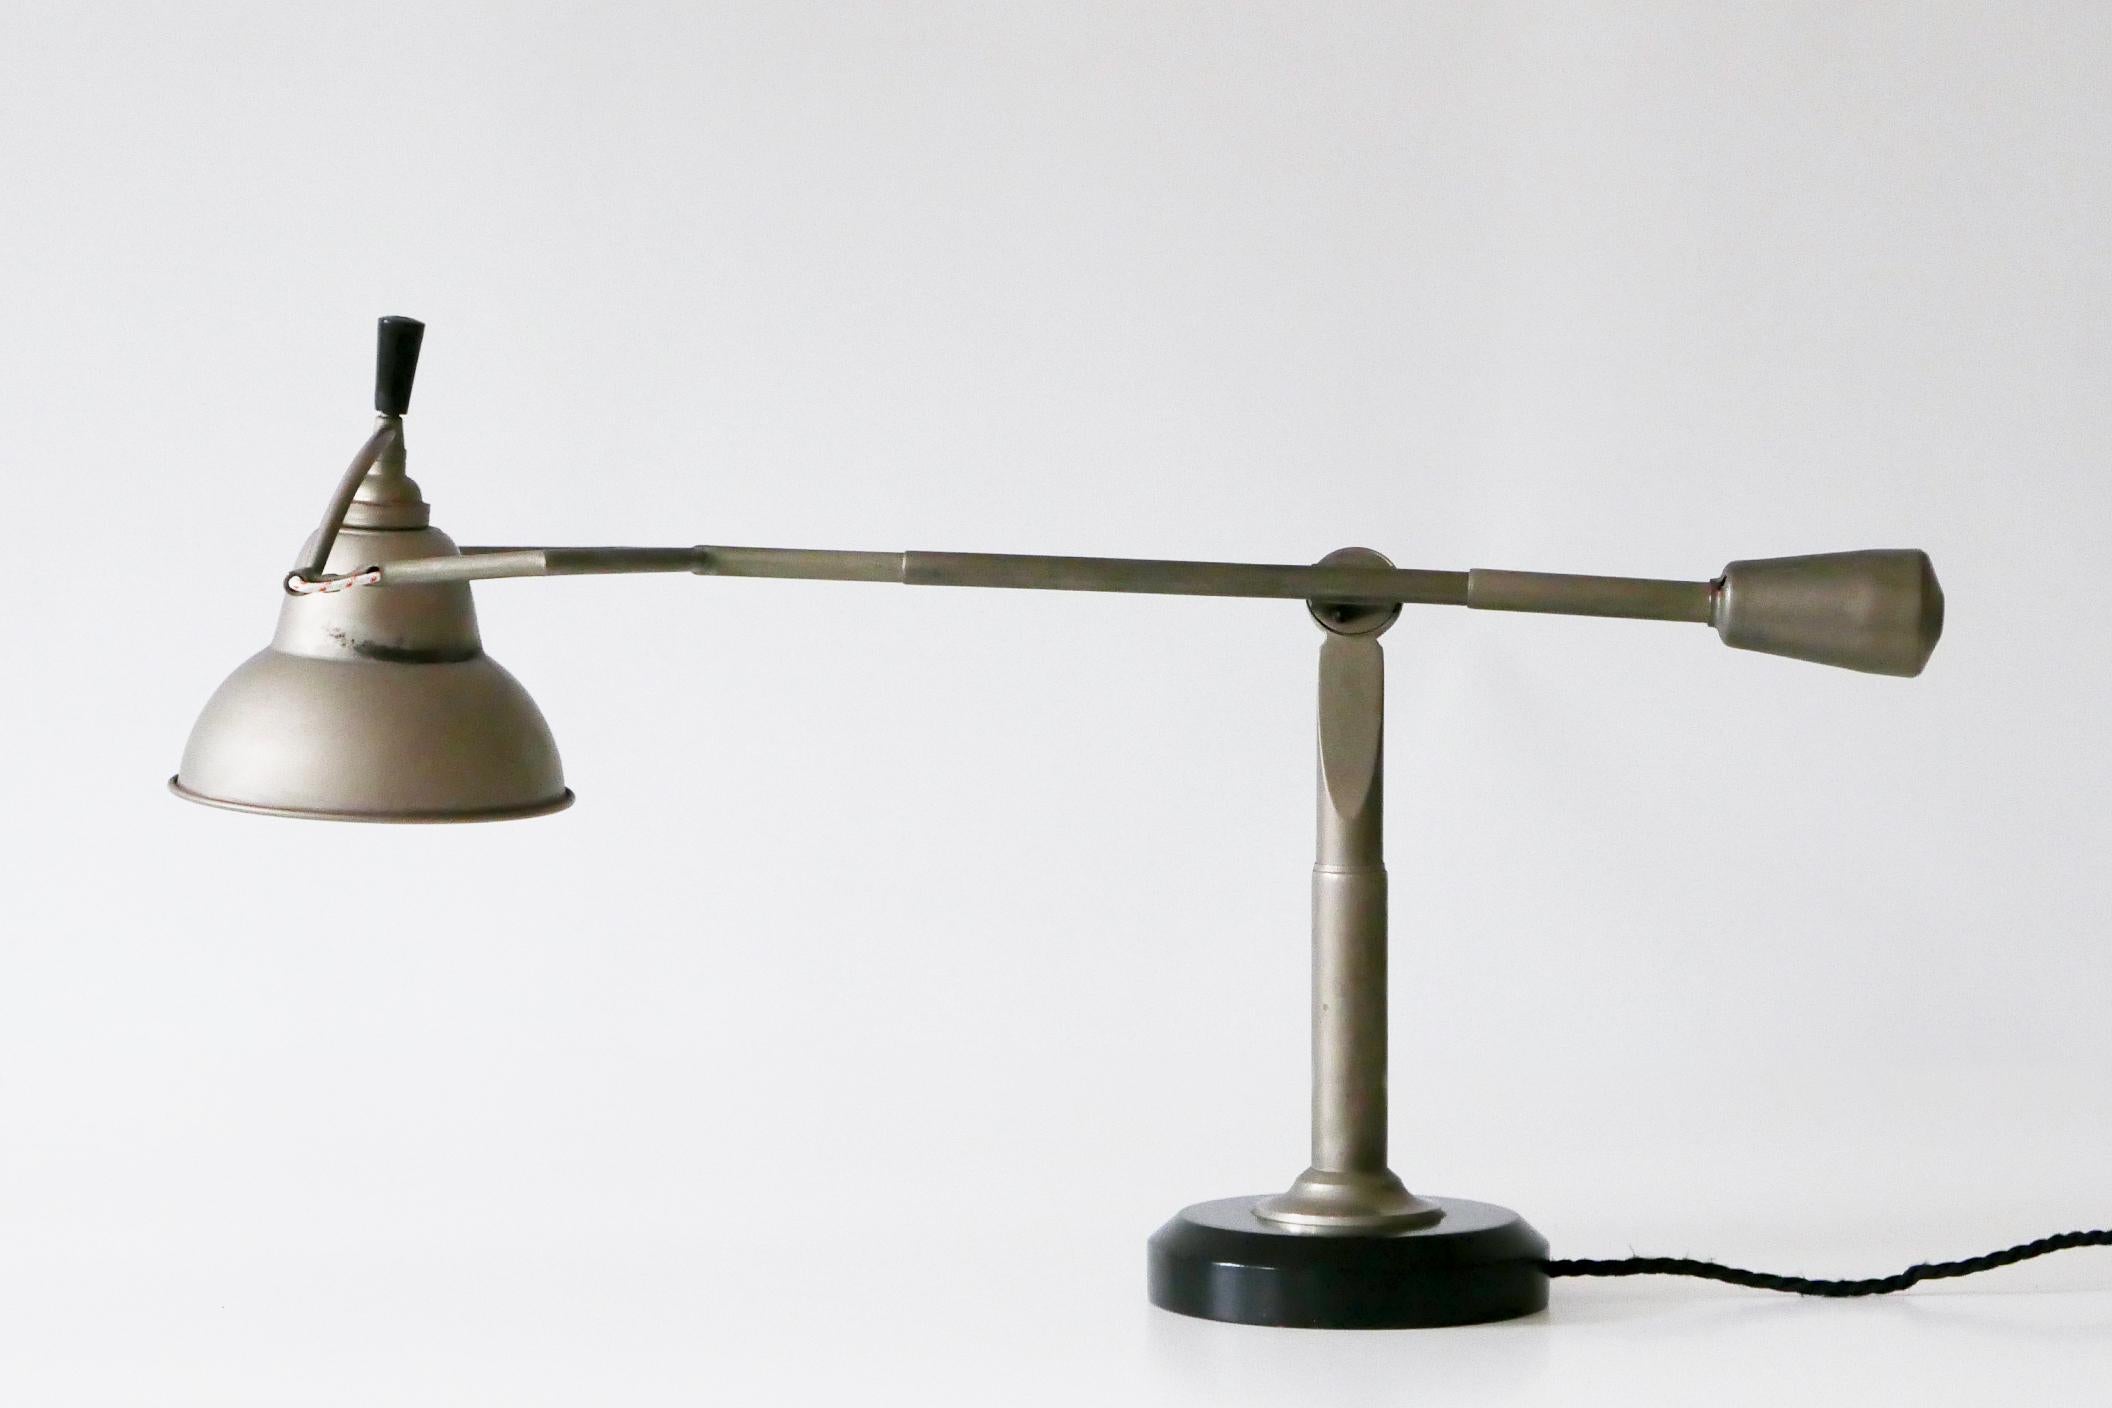 Modernist Counterbalance Table Lamp by Edouard-Wilfred Buquet, 1927, France For Sale 3